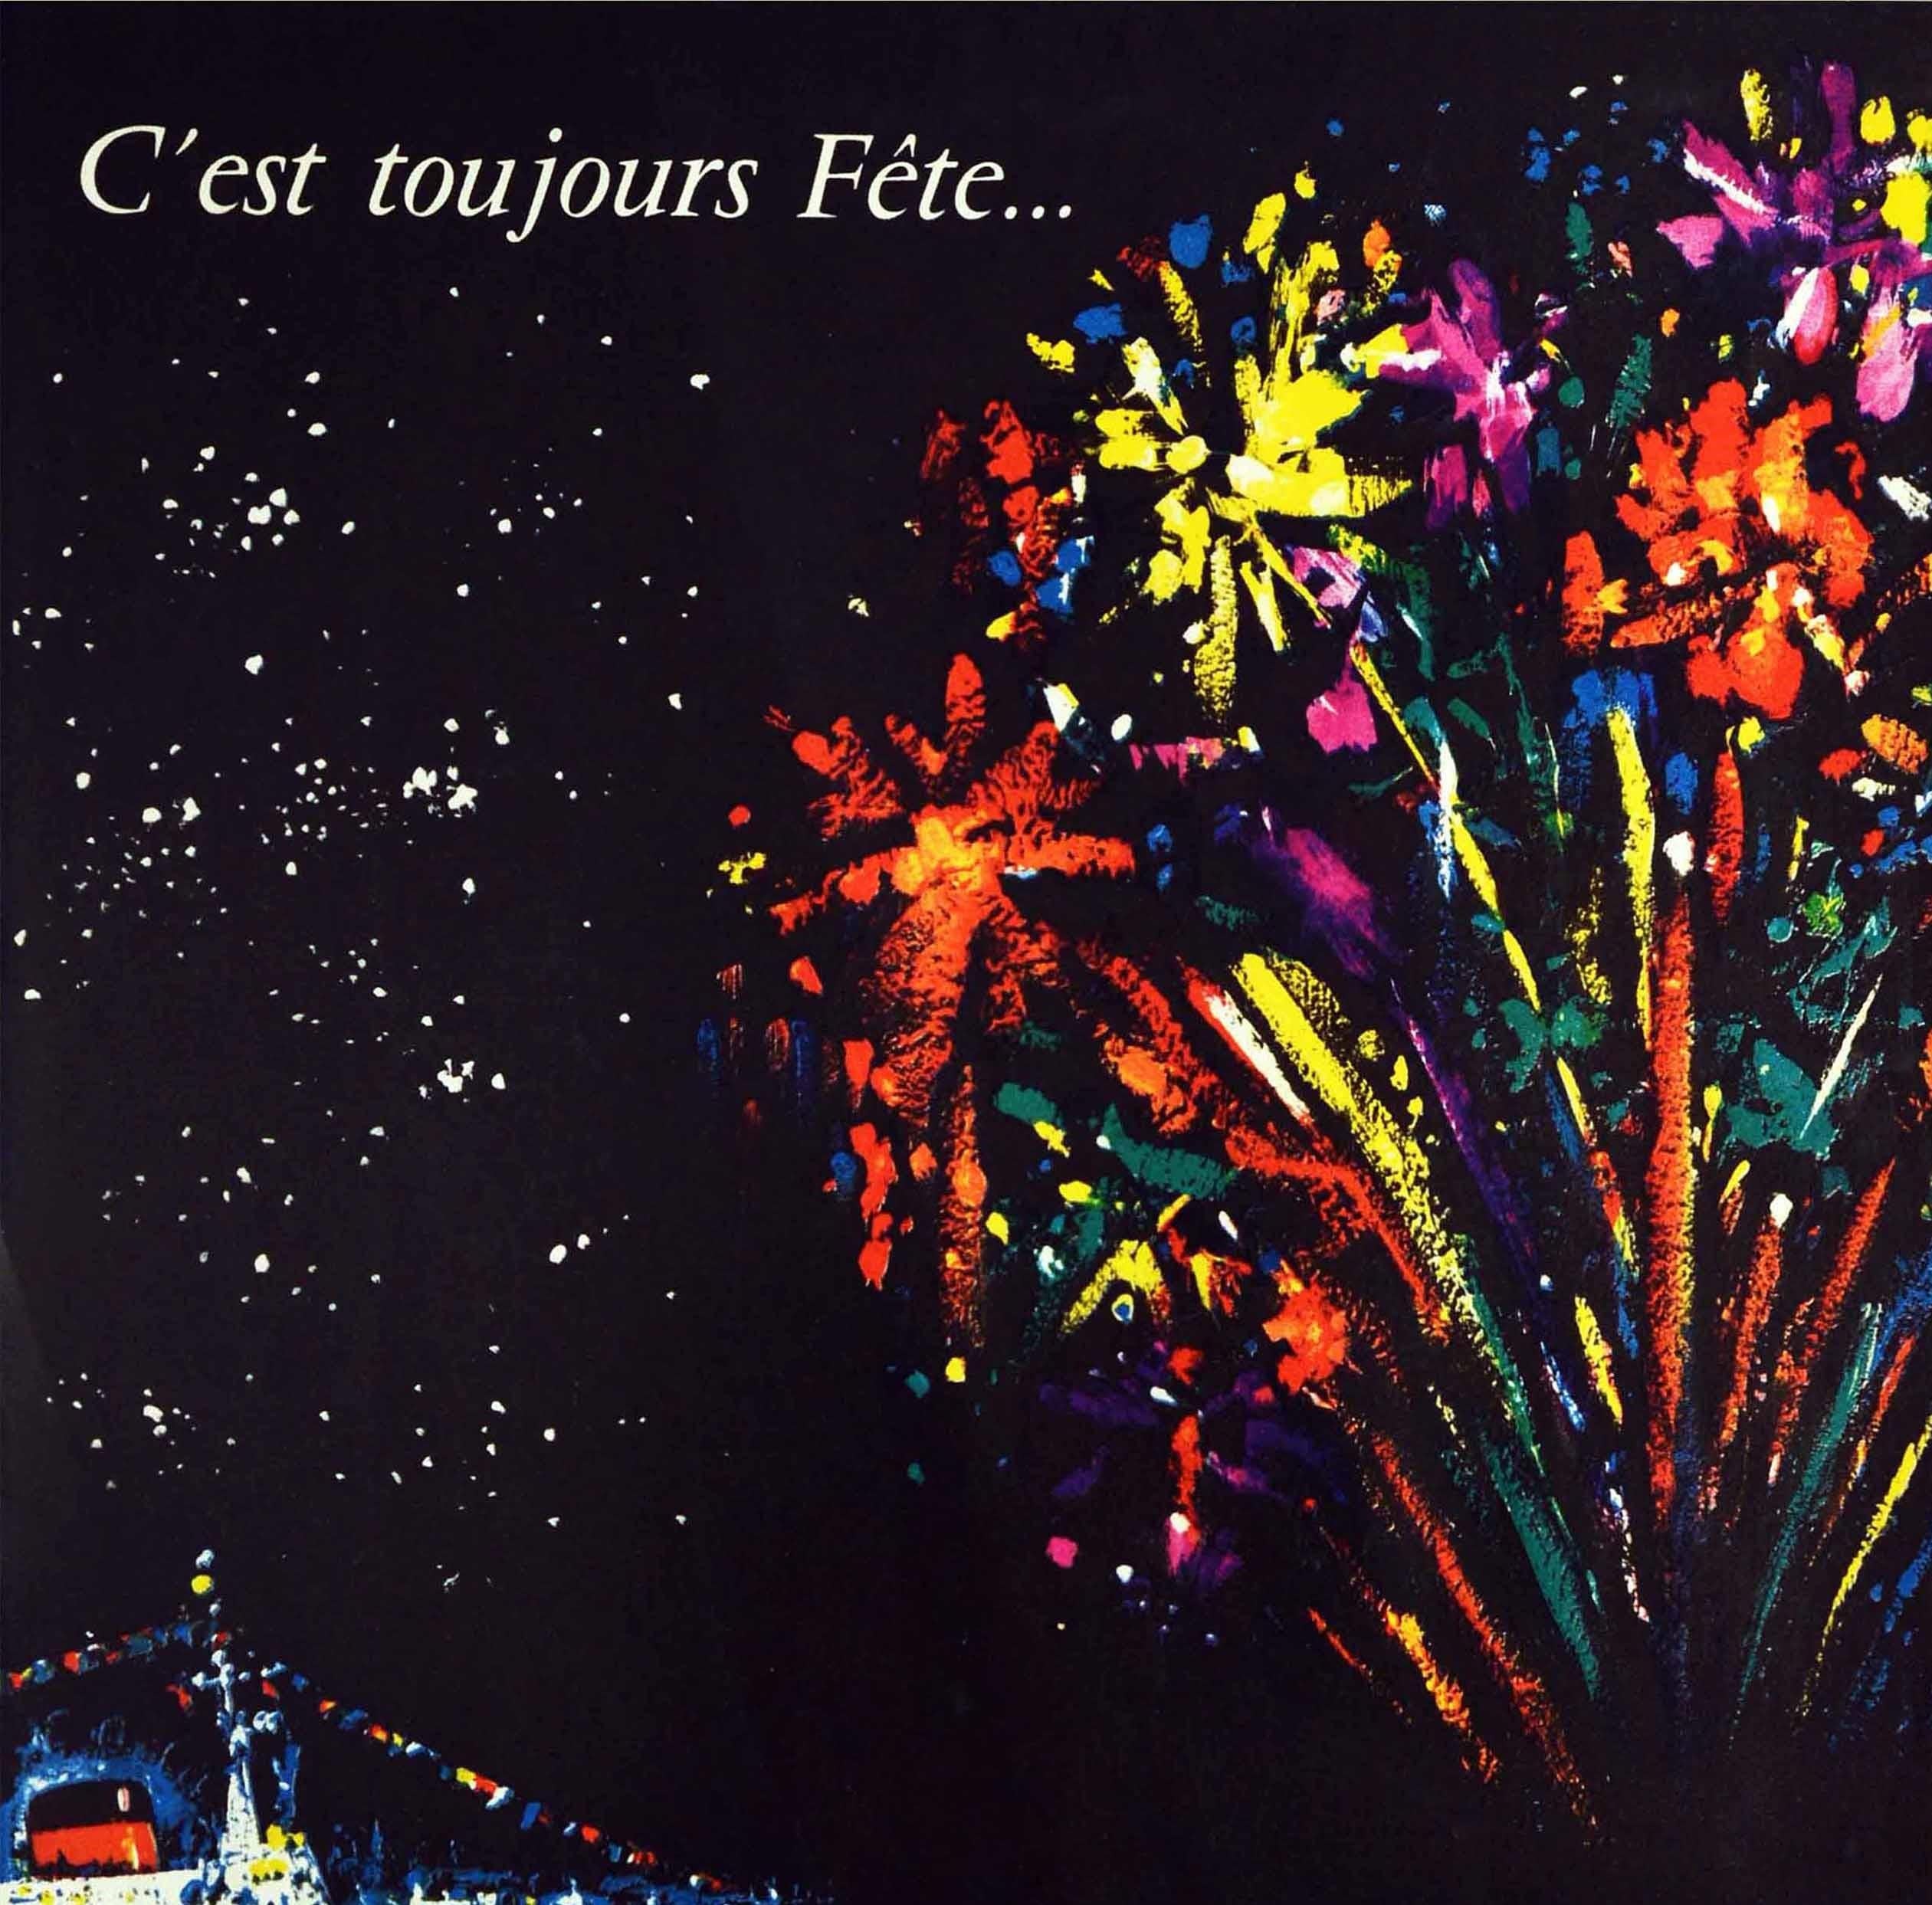 French Original Vintage Cruise Travel Poster Toujours Fete CGT Ocean Liner Fireworks